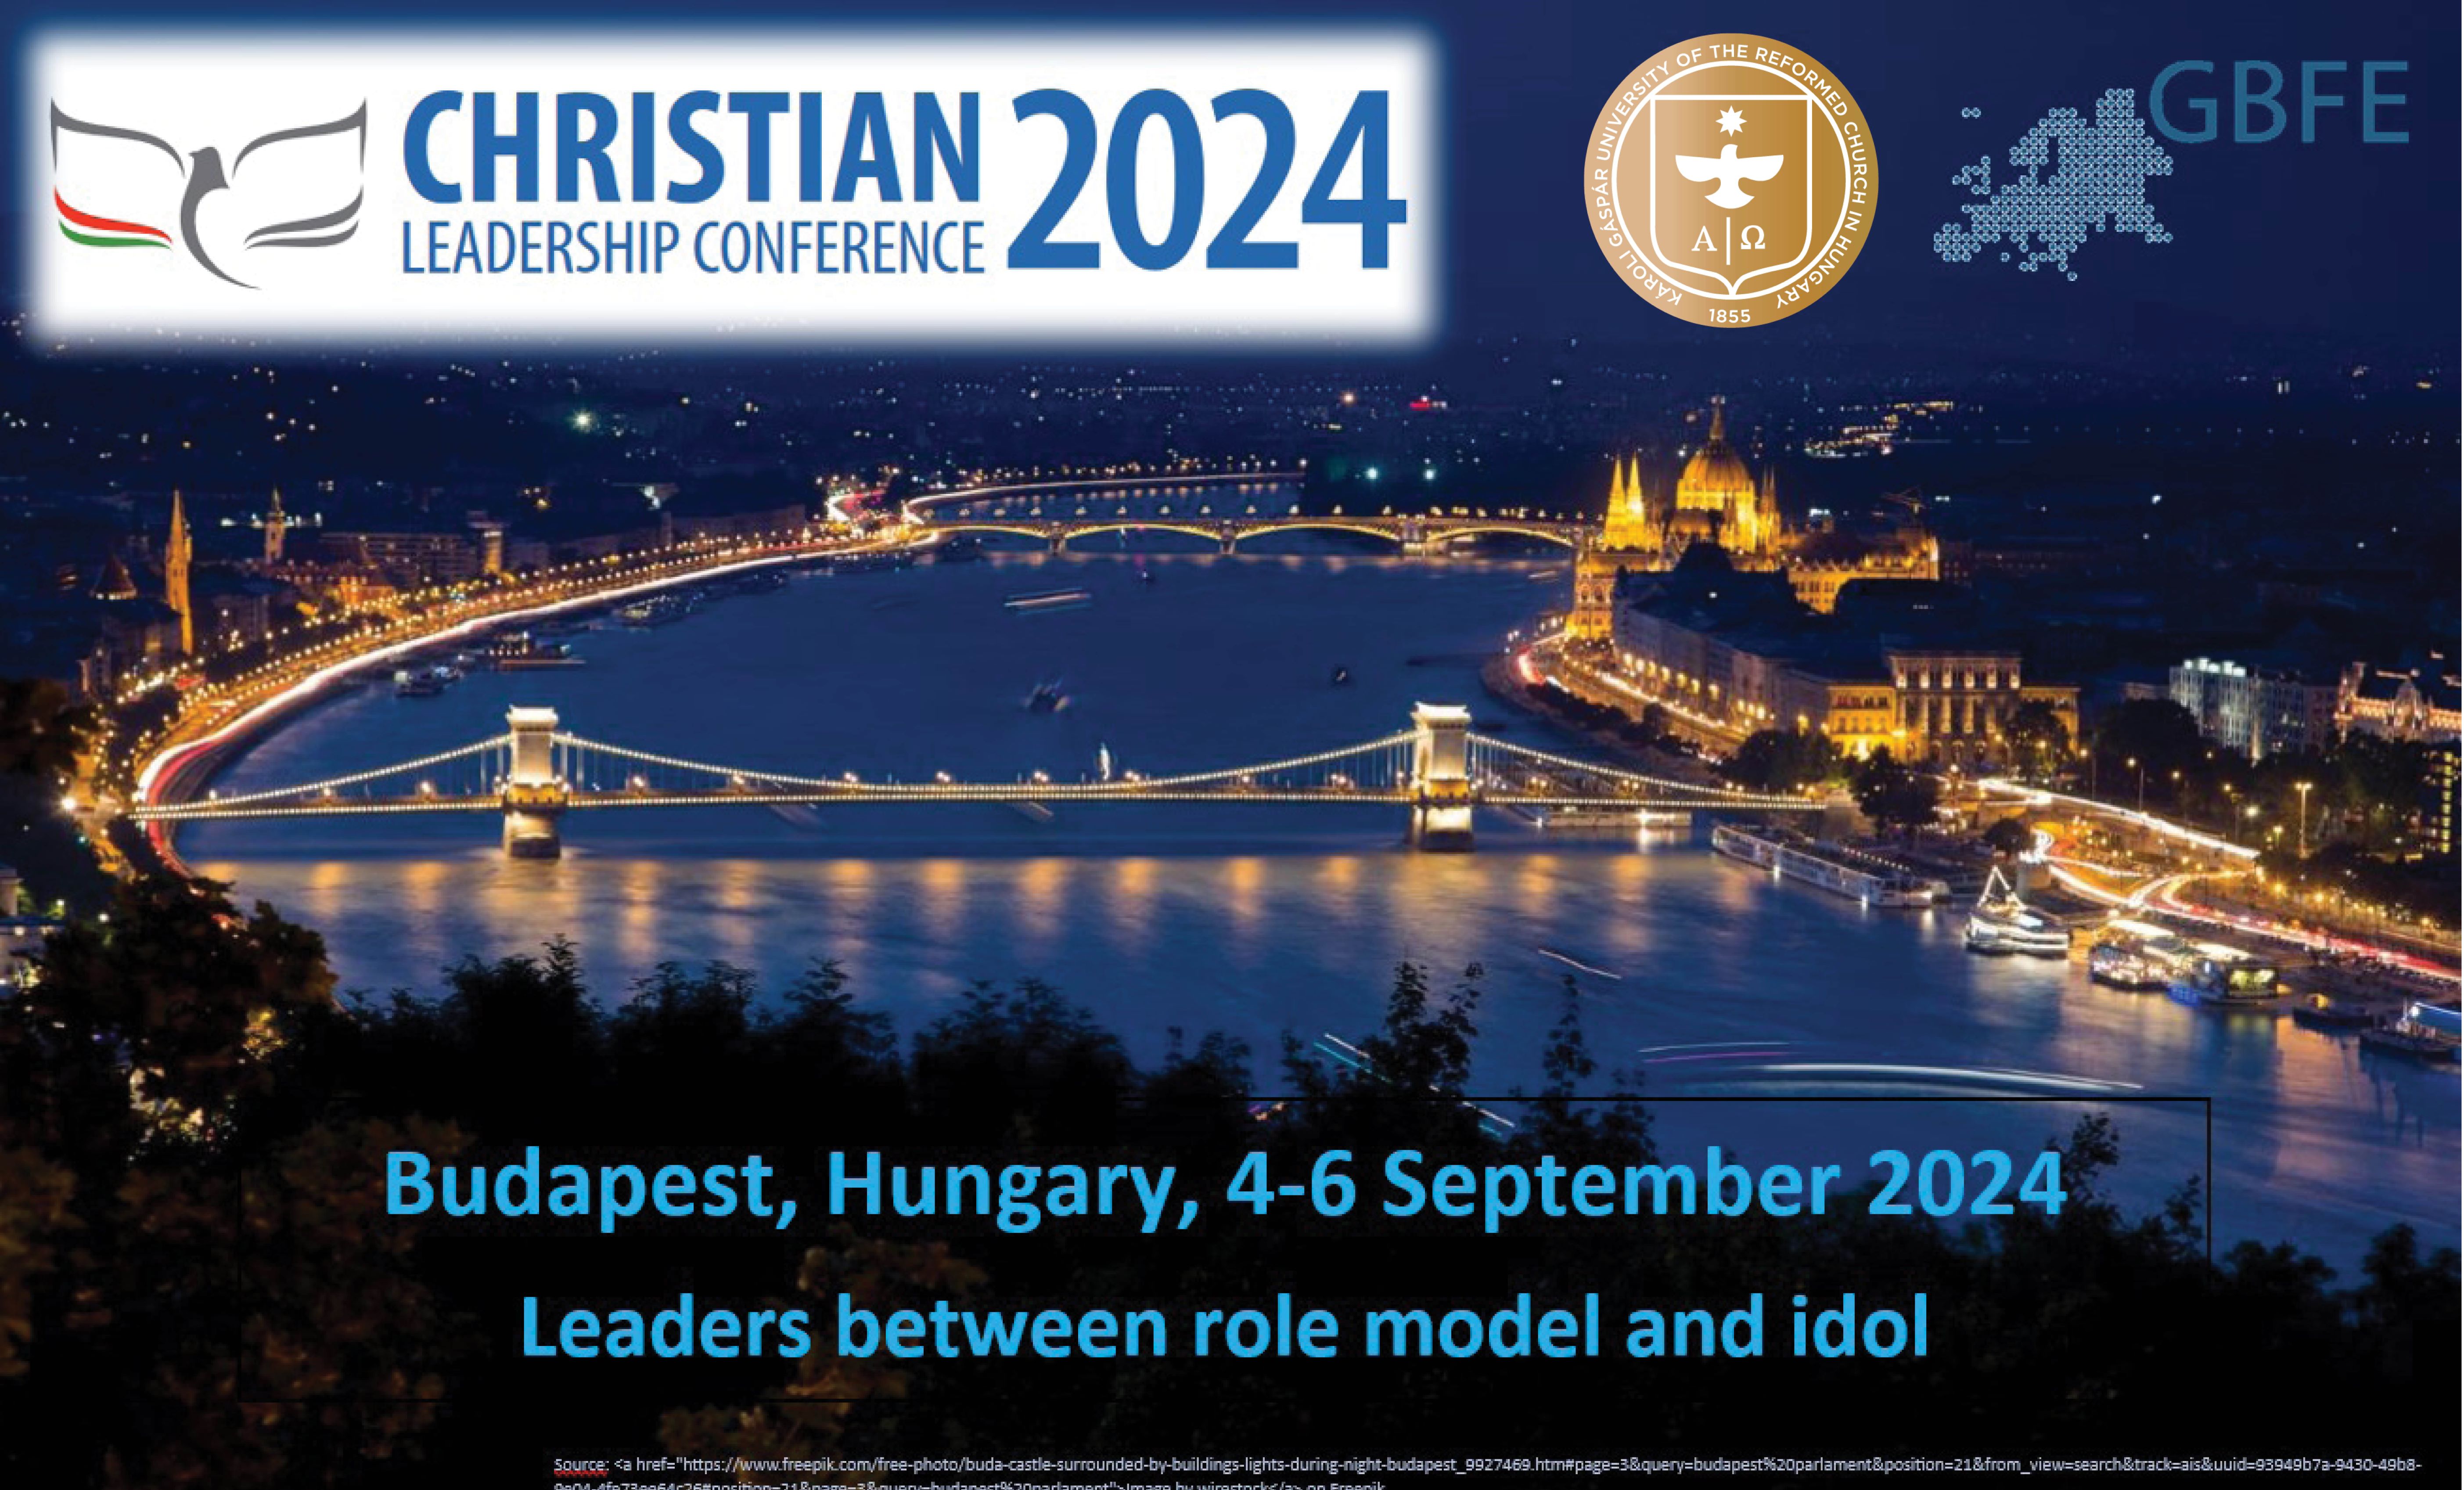 Christian Leadership Conference 2024 - 4-6 September 2024 Budapest, Hungary Leaders between role model and idol